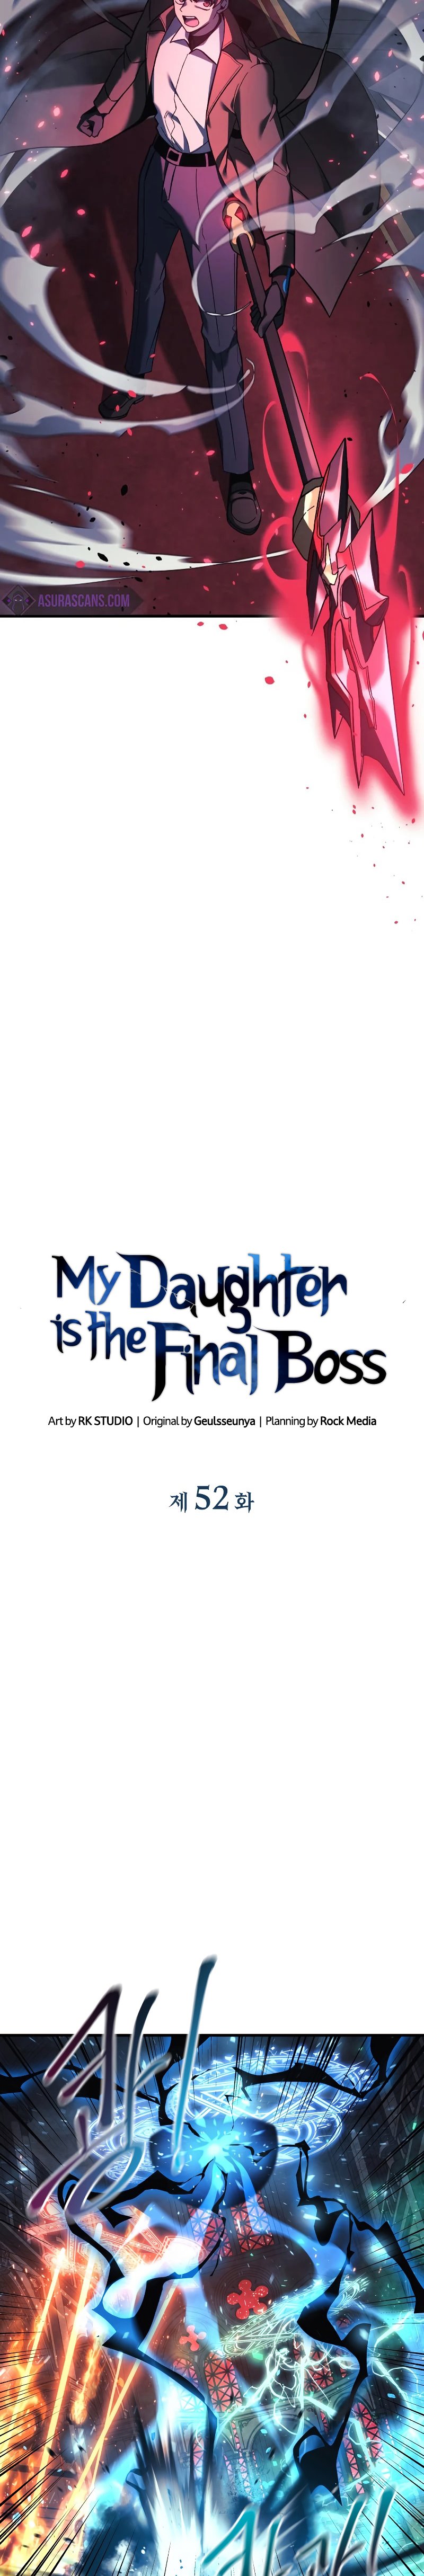 My Daughter is the Final Boss52 (2)